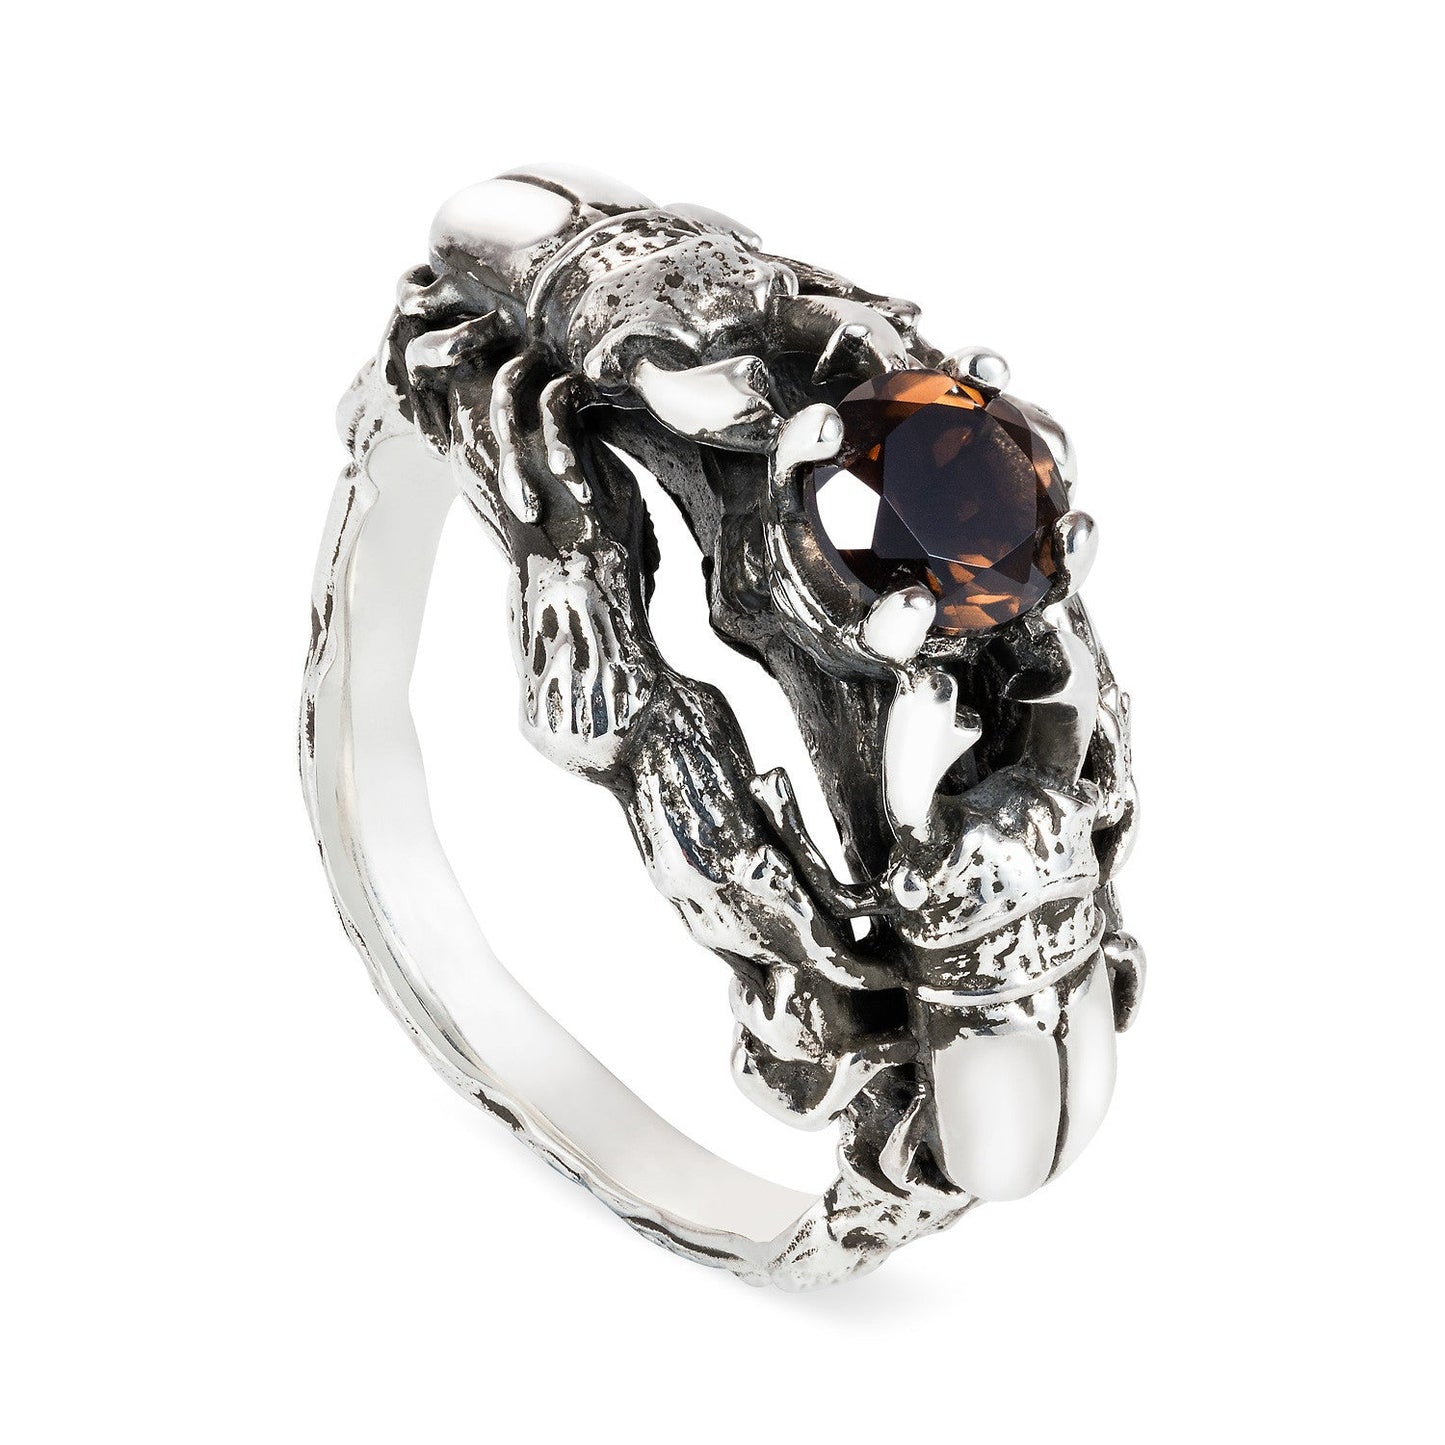 Little Stag Beetle Cocktail Ring with smokey quartz